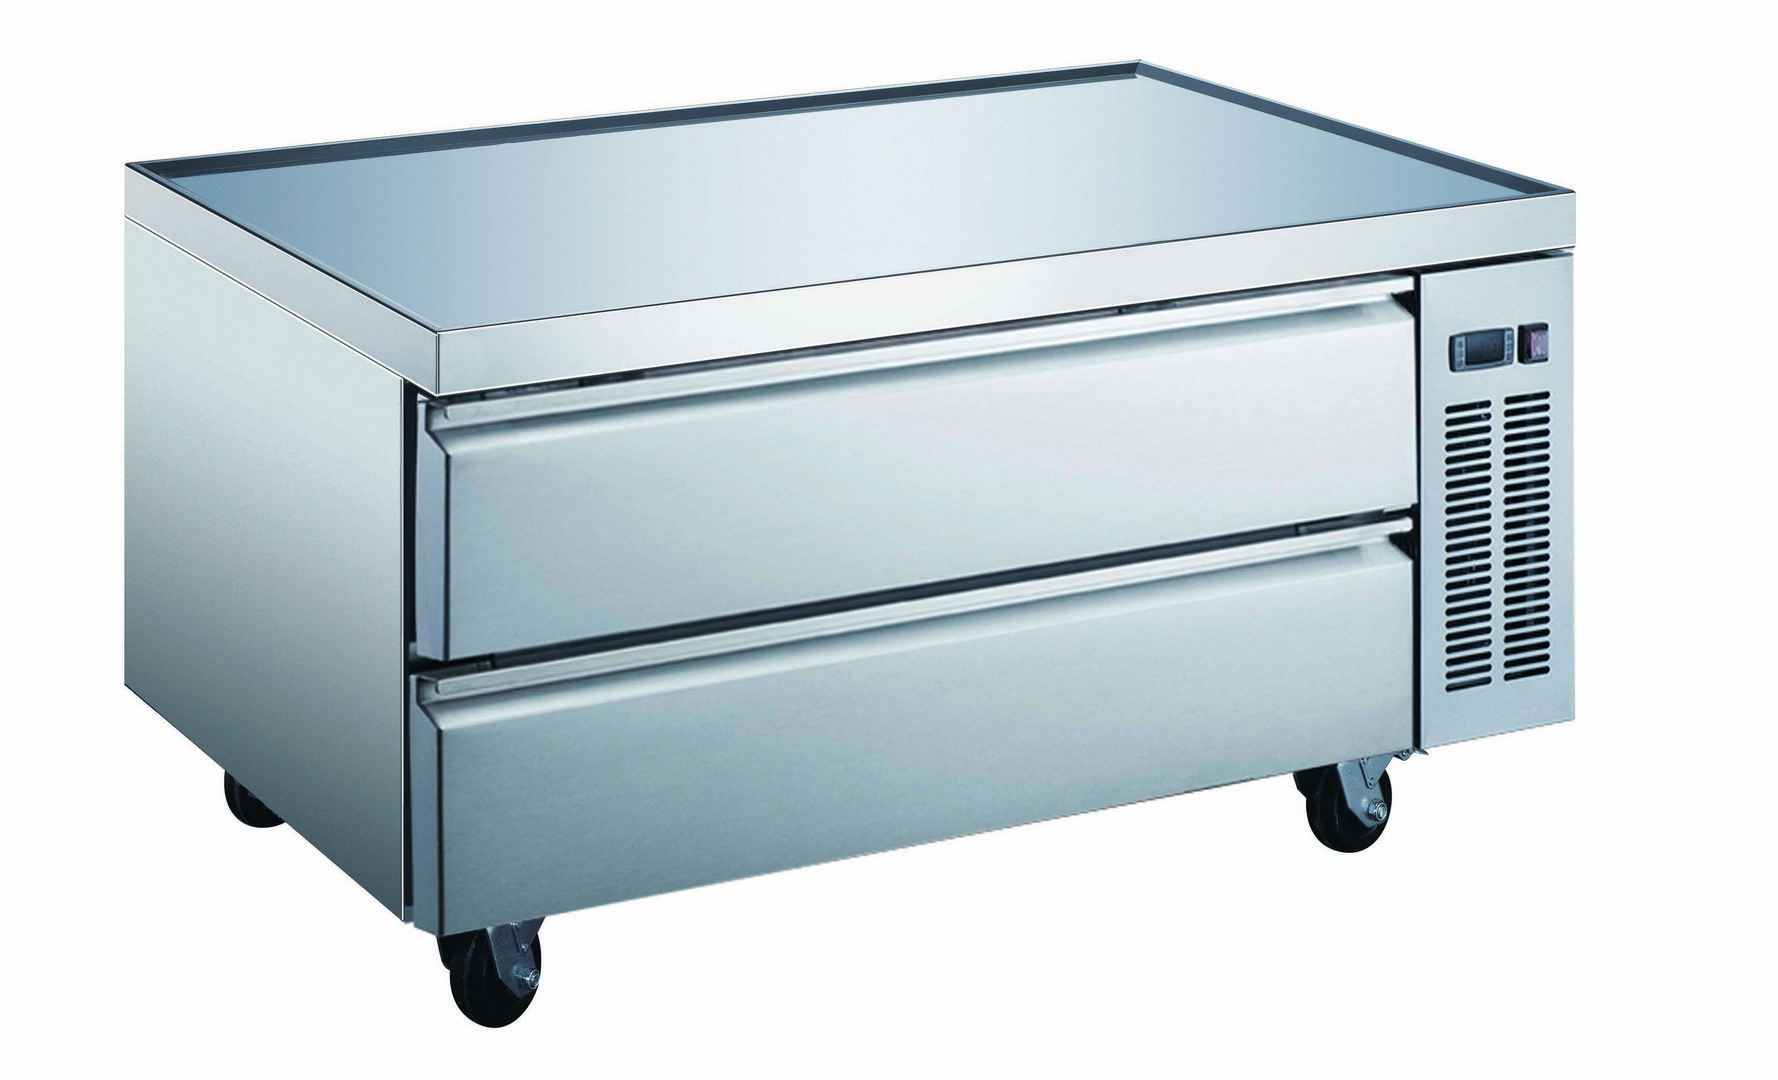 A stainless steel table with two drawers and wheels.